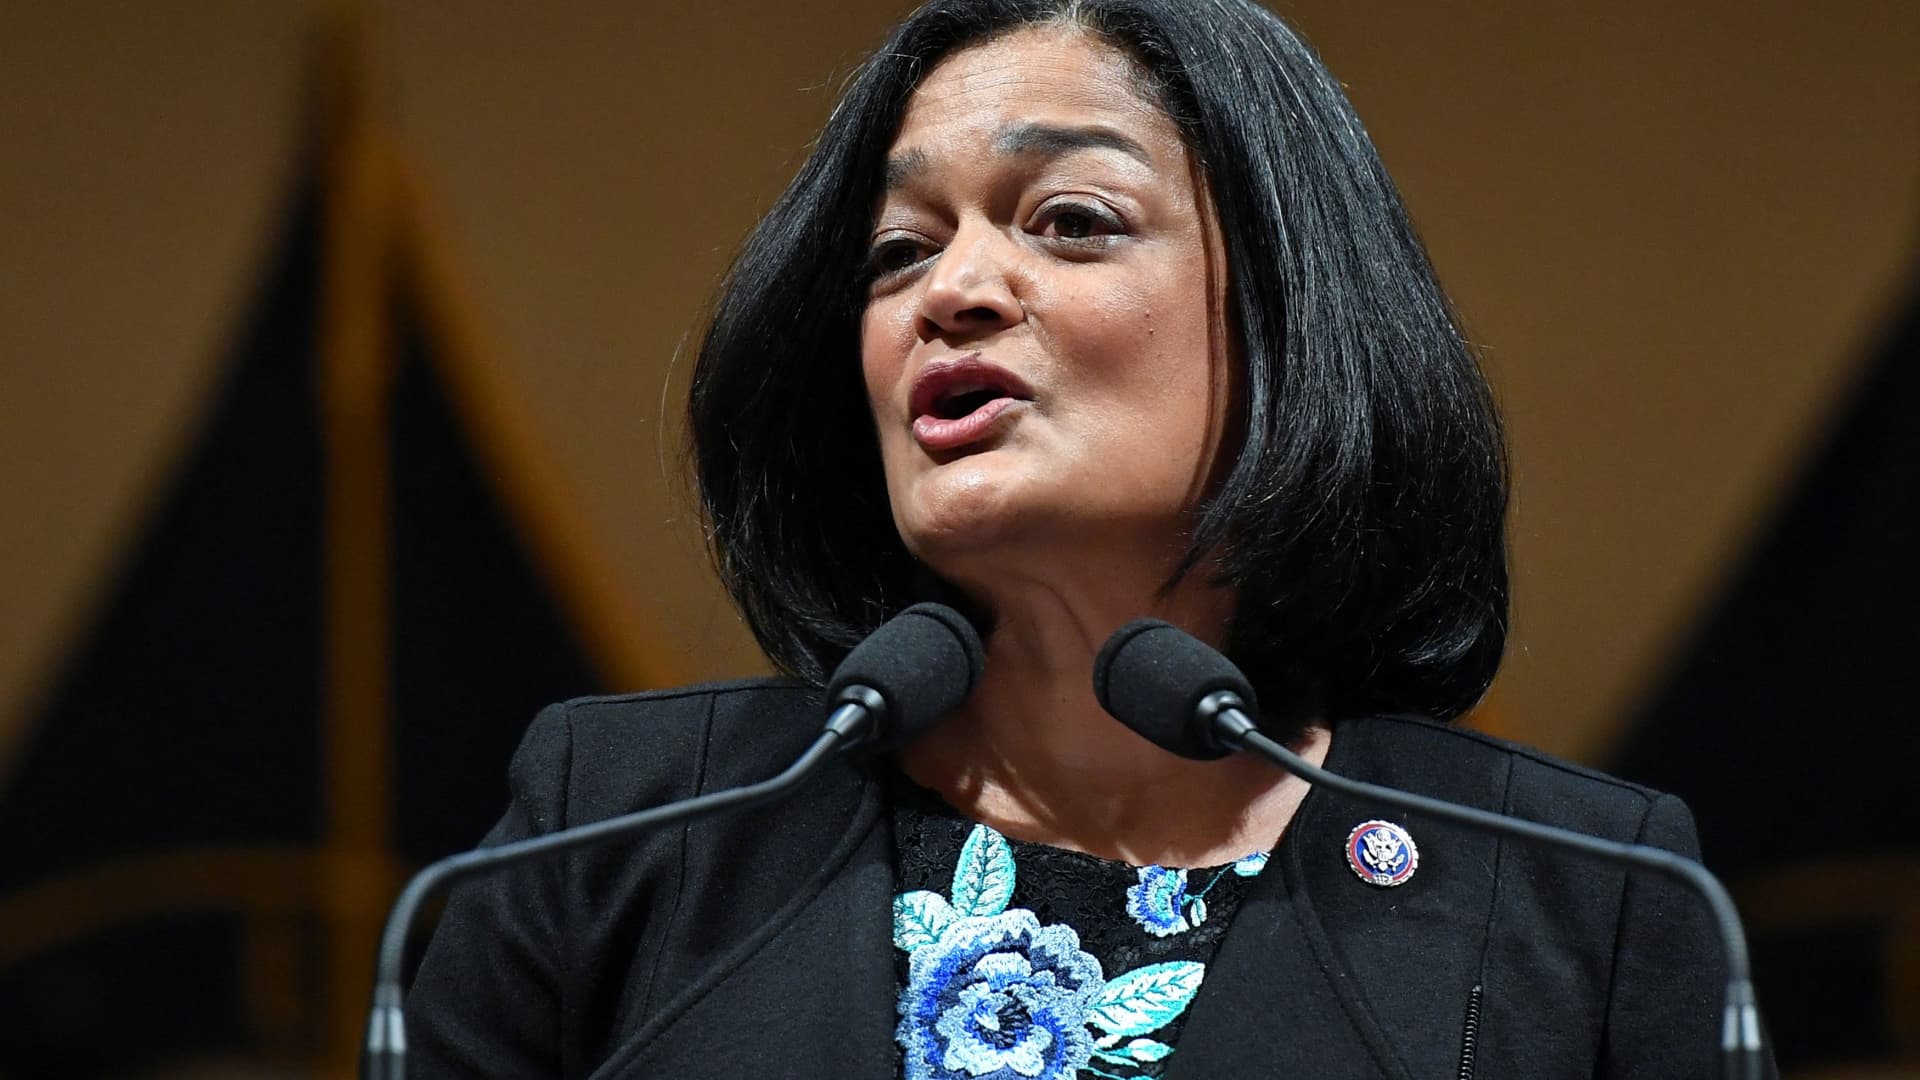 Rep. Pramila Jayapal (D-WA) speaks as members share the recollections on the first anniversary of the assault on the Capitol in the Cannon House Office Building in Washington, January 6, 2022.